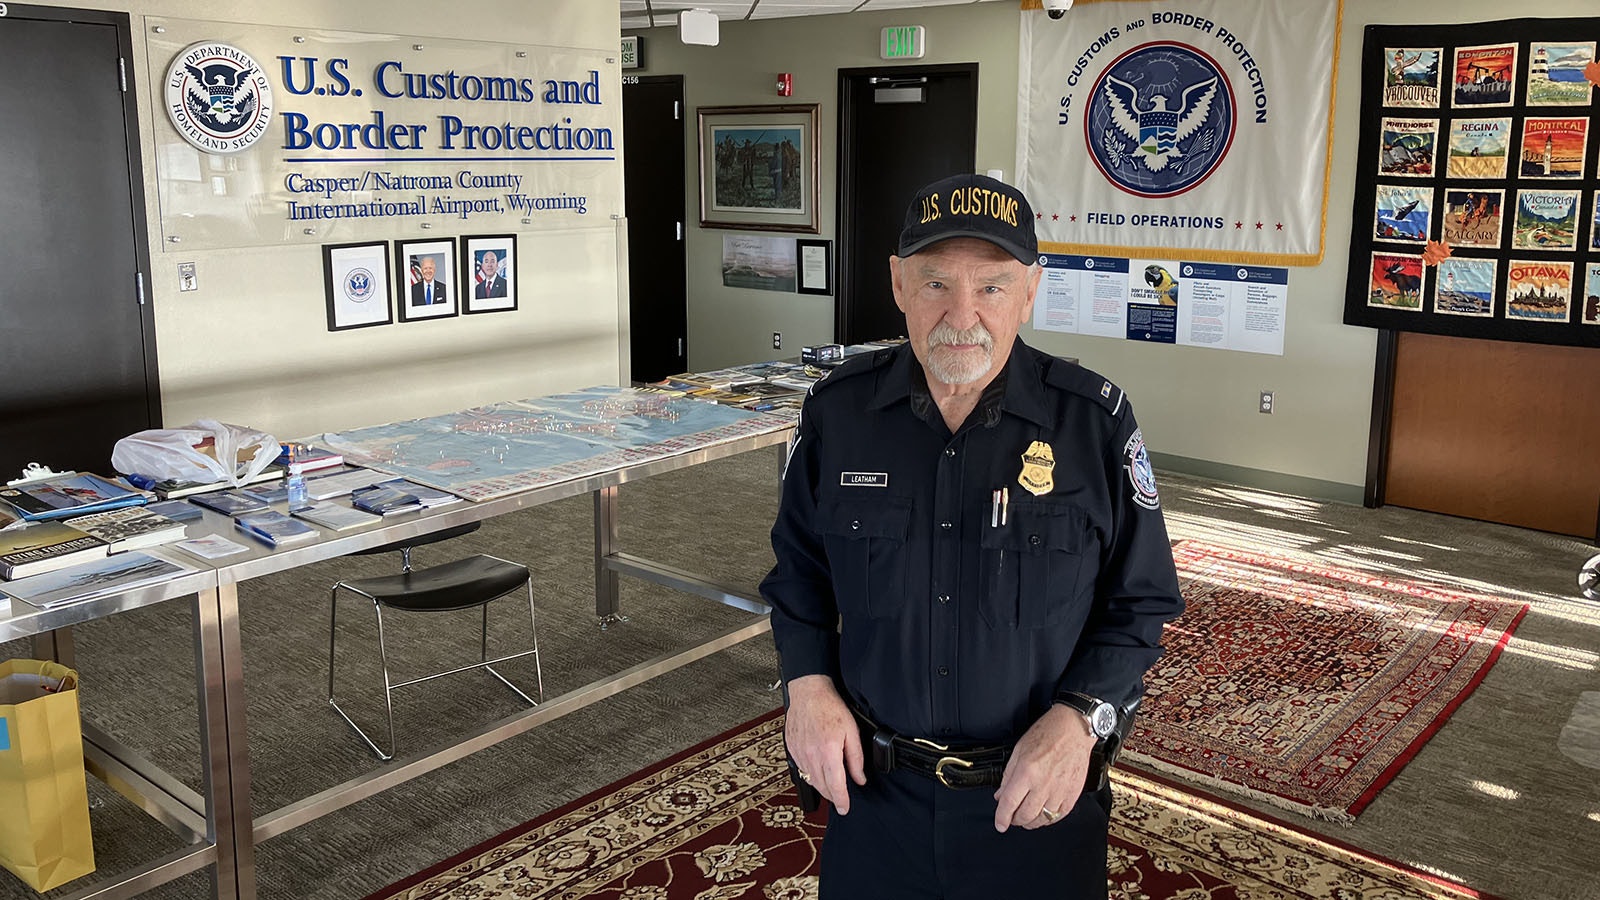 John “Dale” Leatham served as the U.S. Customs and Border Protection officer in Casper for more than 40 years.